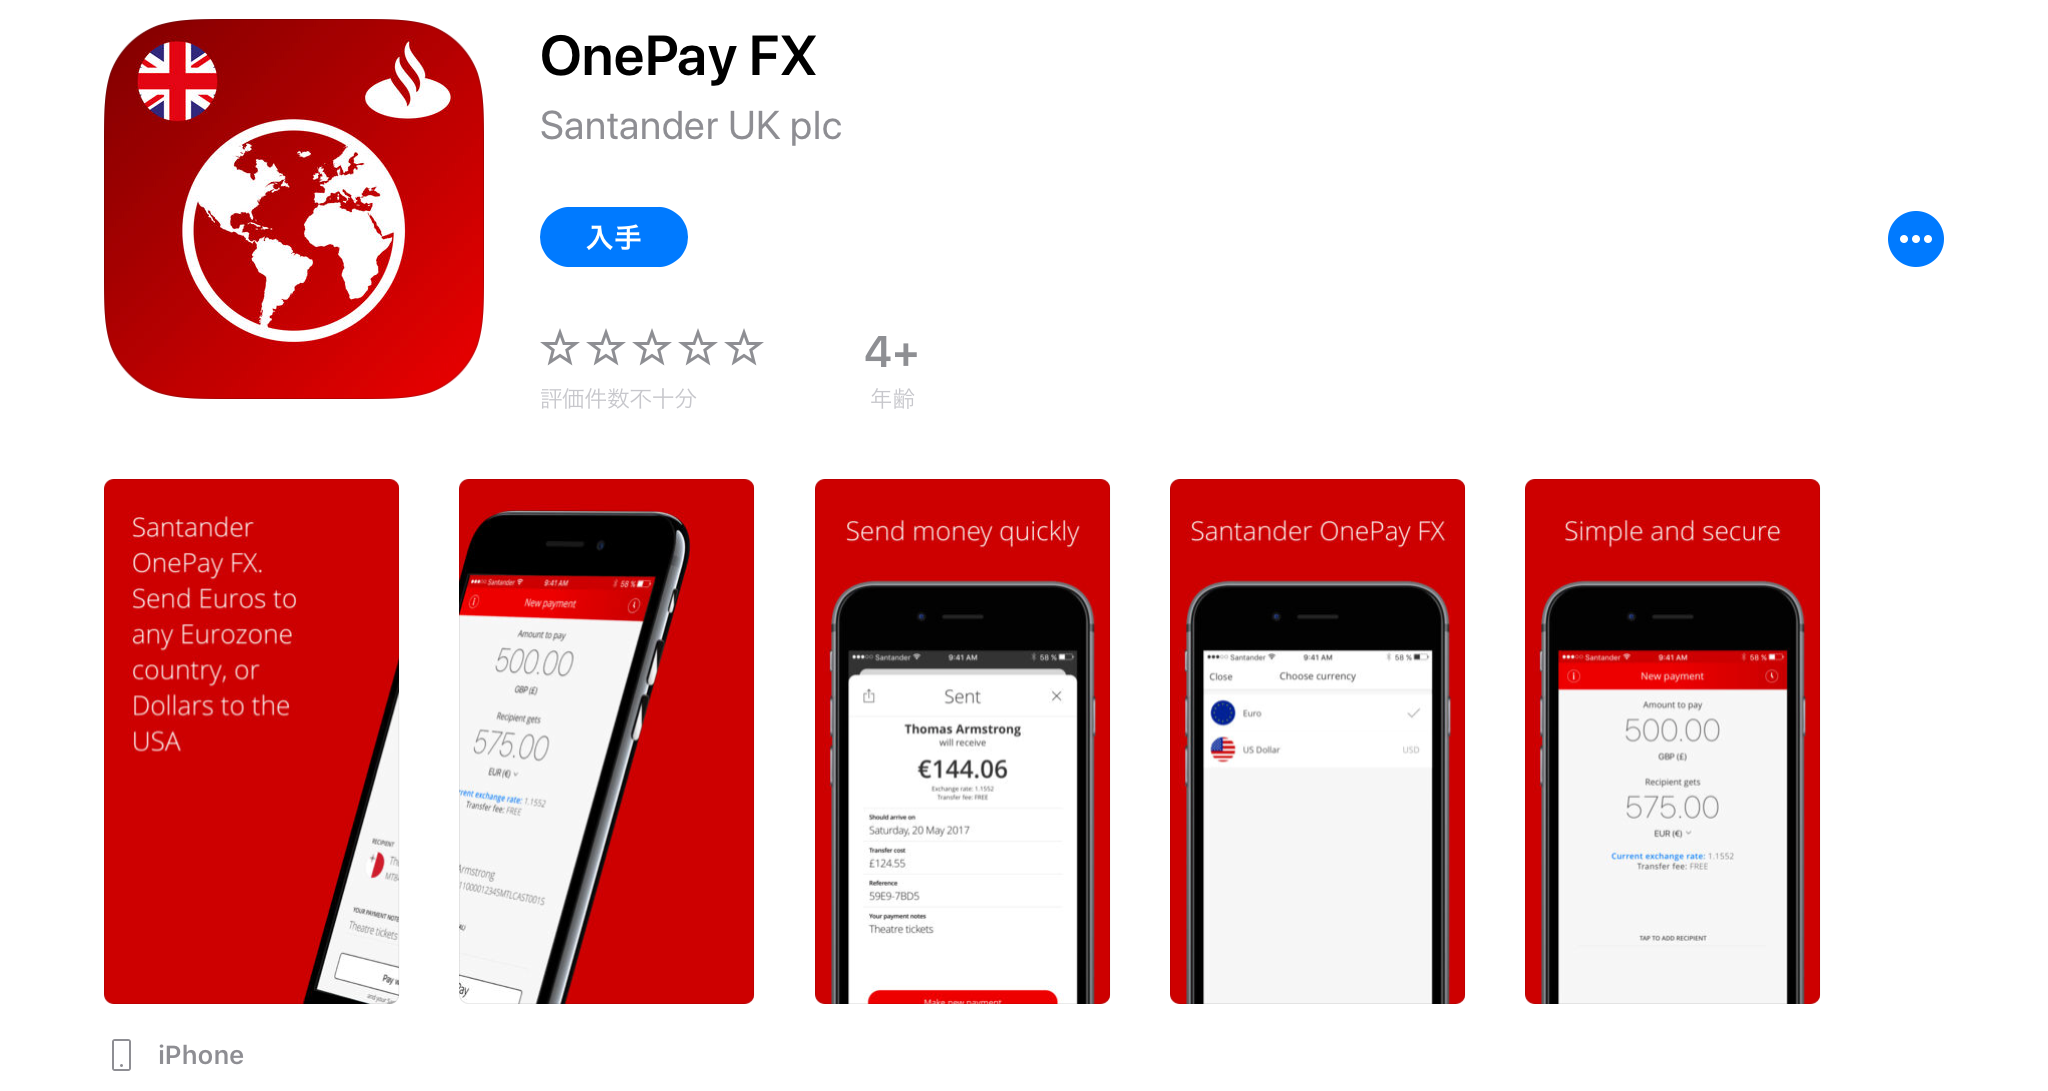 One Pay FX app